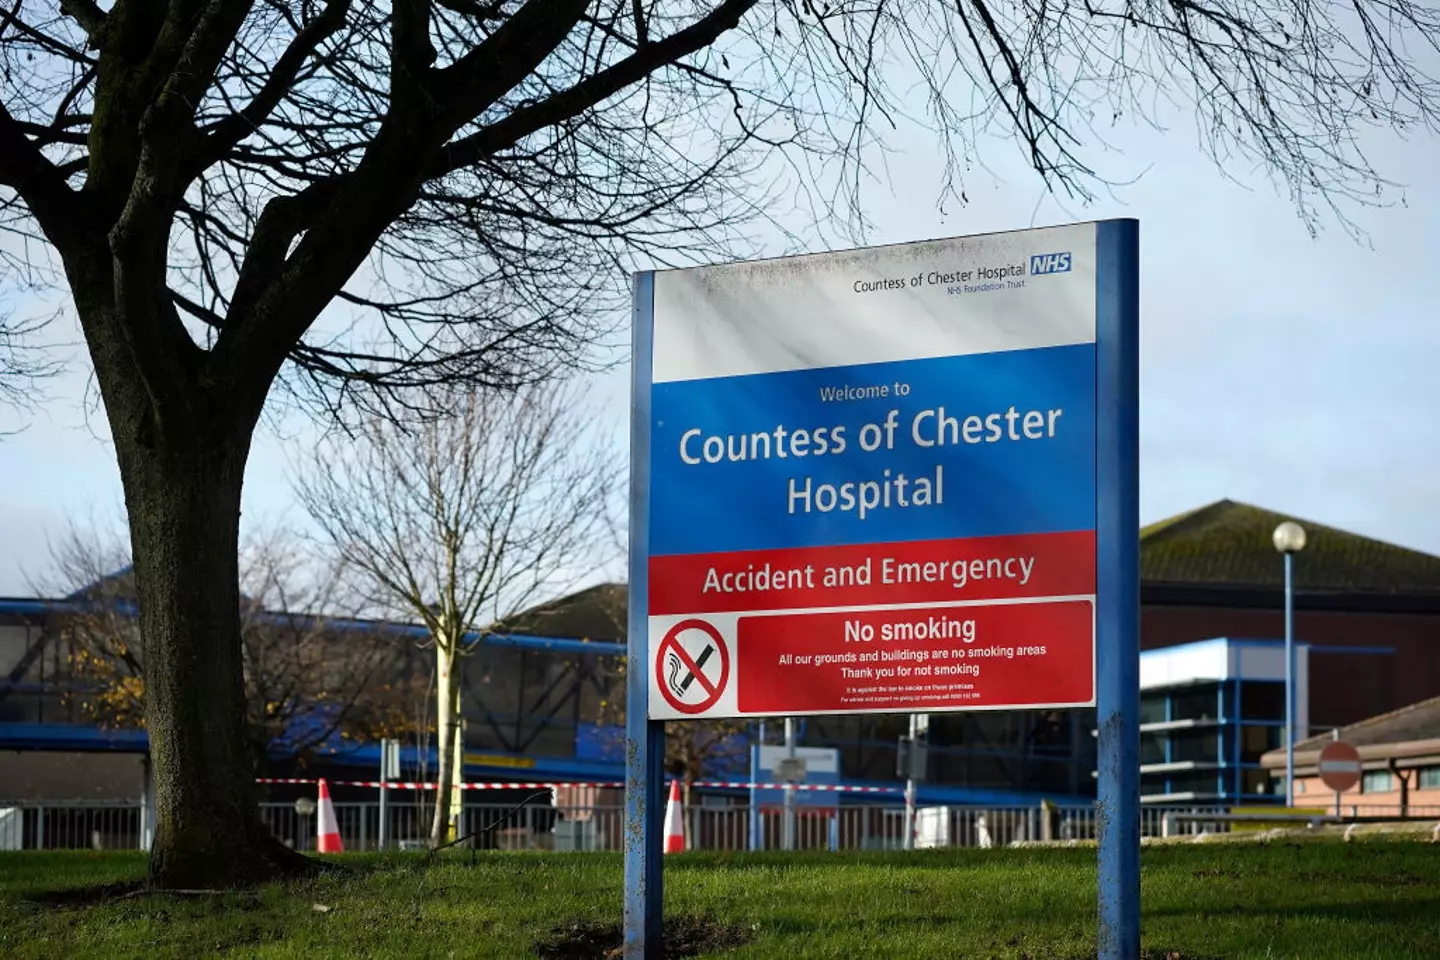 The Countess of Chester hospital was where Lucy Letby carried out her crimes between 2015-2016.